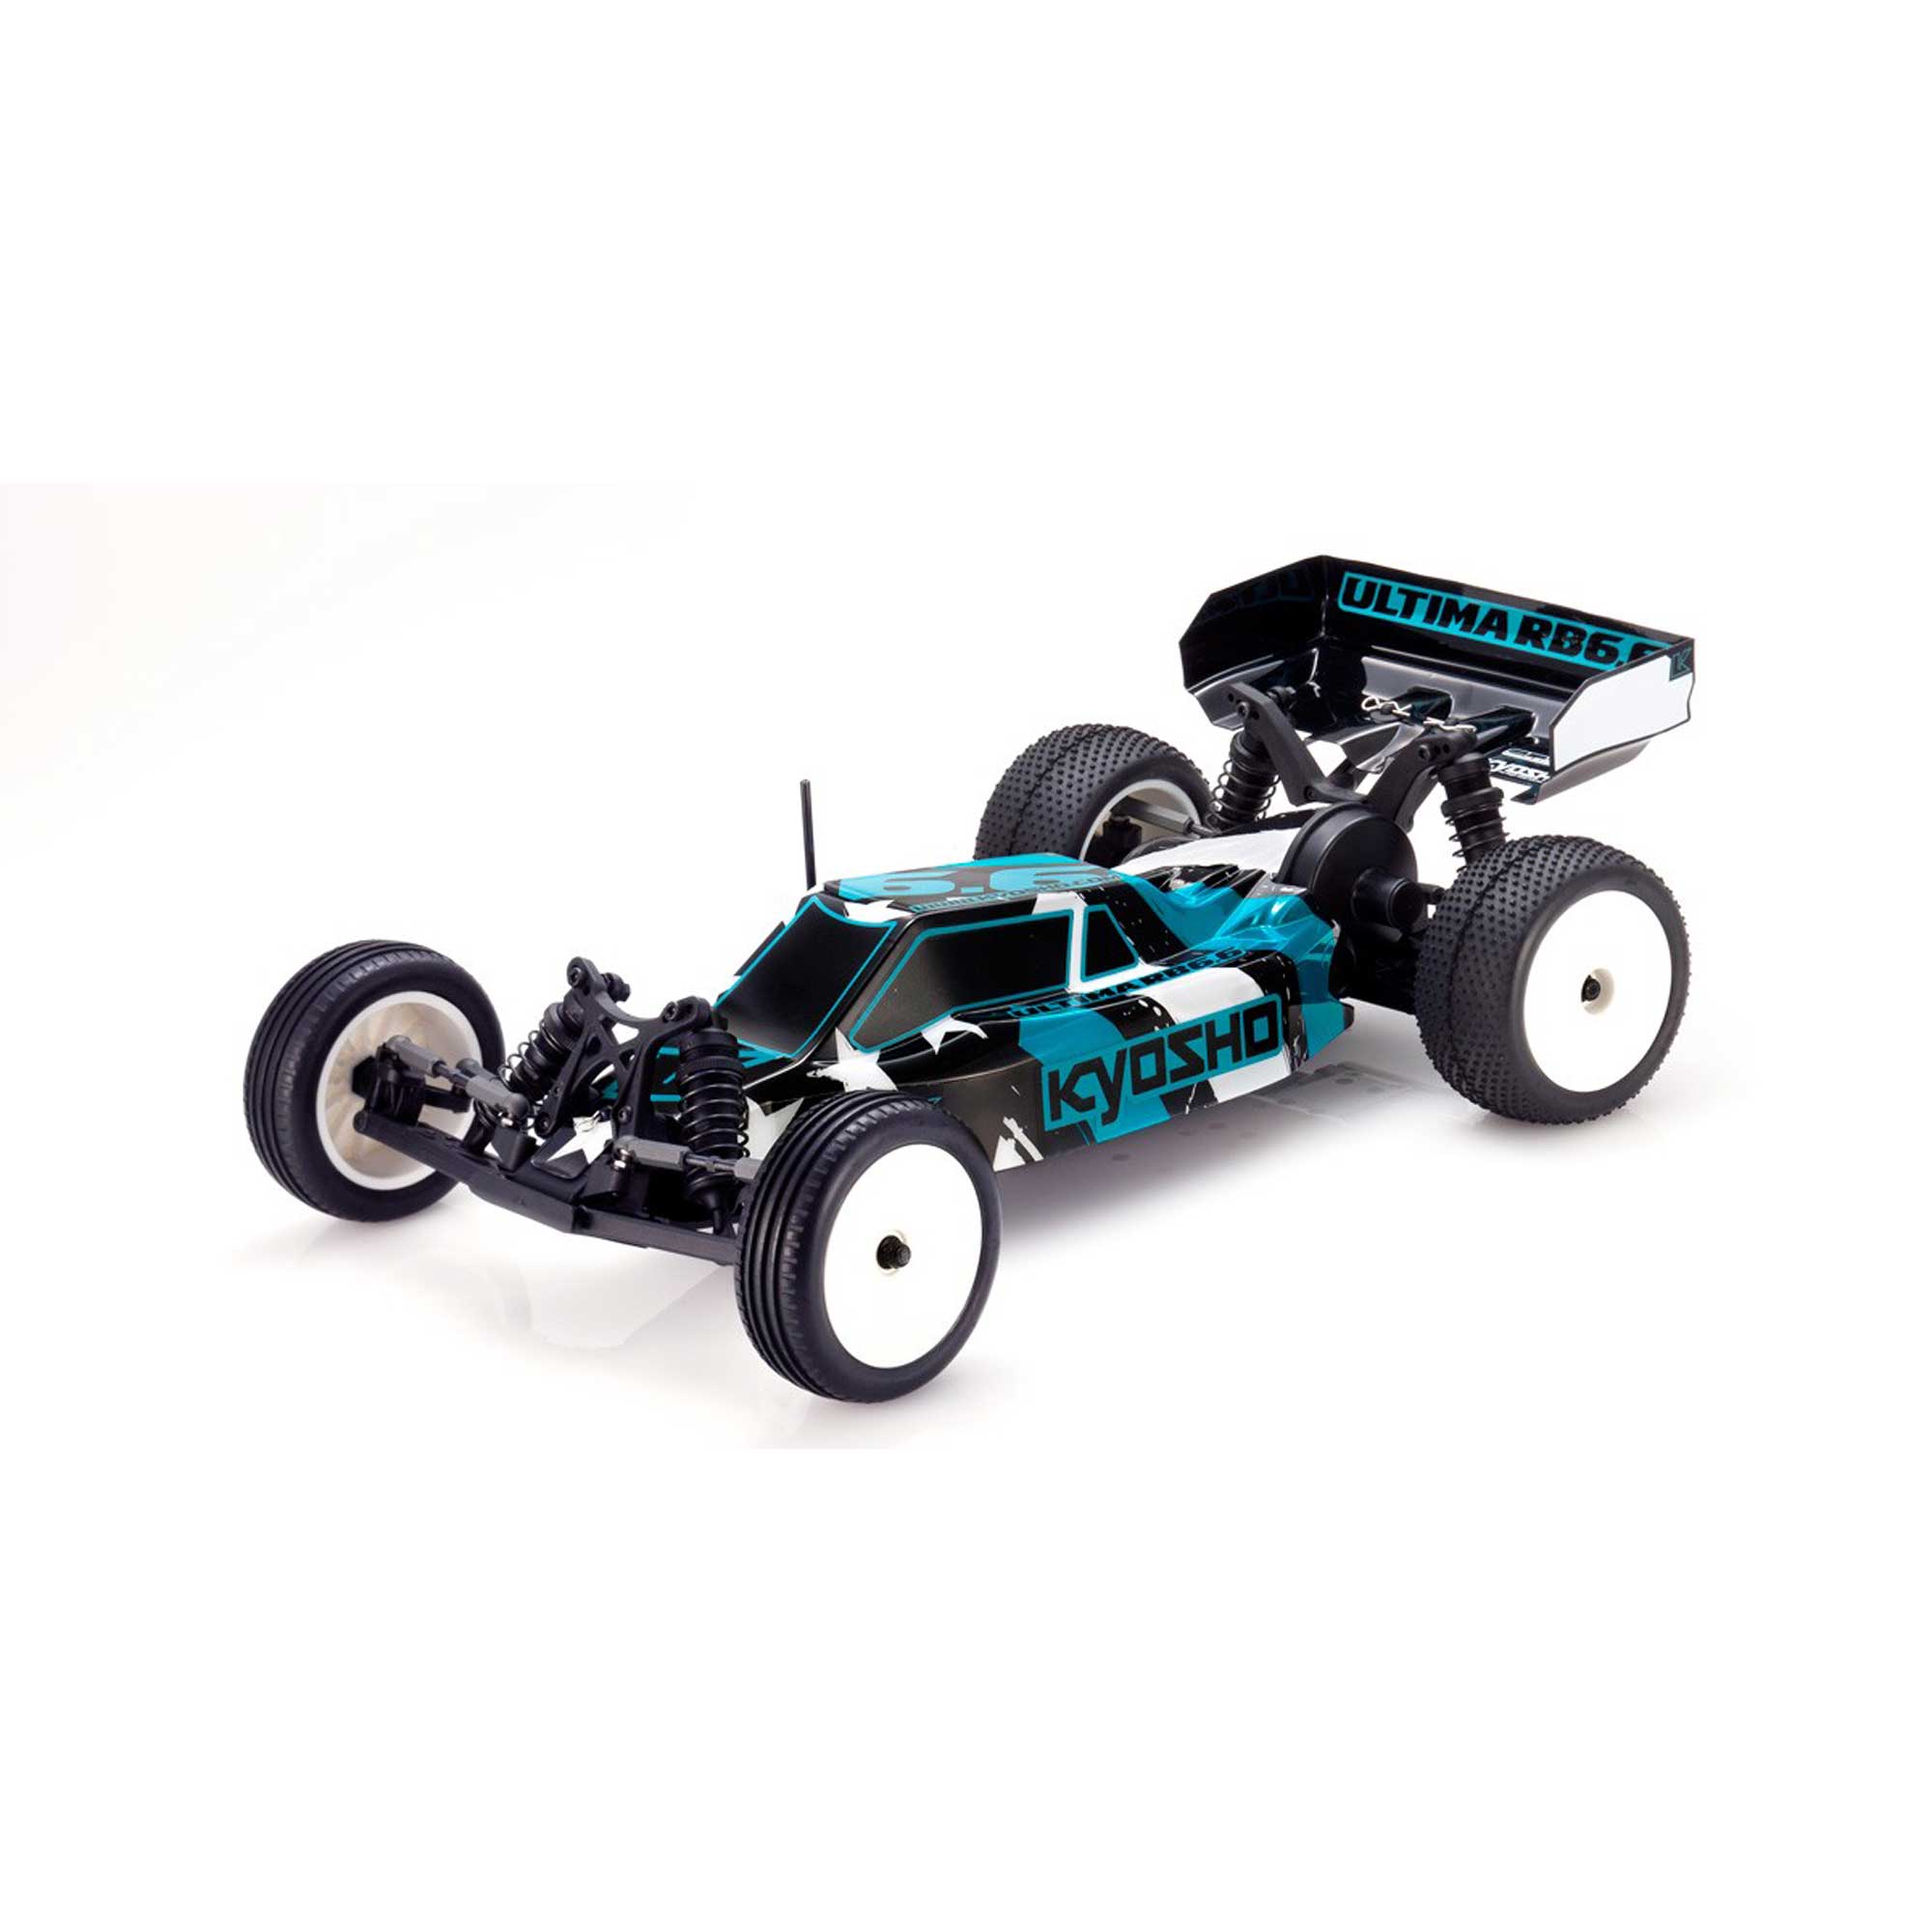 KT231 KYOSHO Ultima RB6.6 1:10 2wd readyset #34310RS 